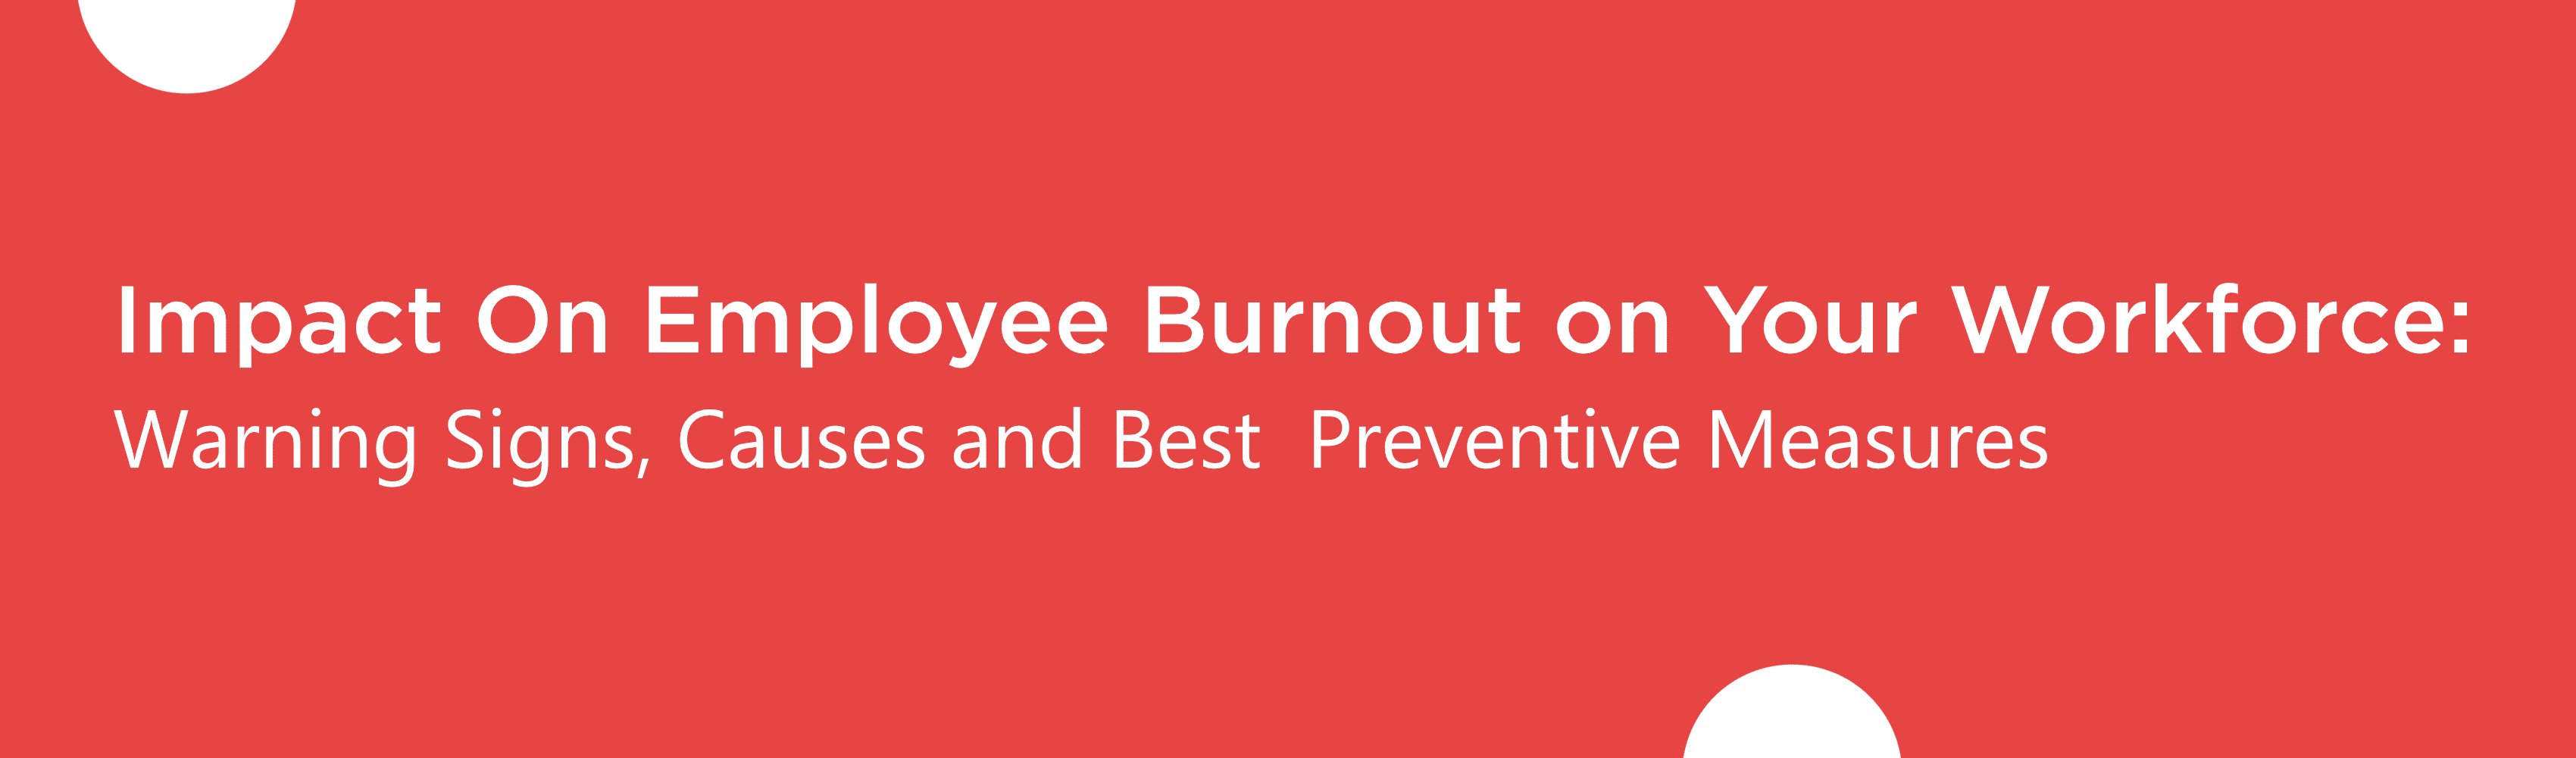 Impact of Employee Burnout on Your Workforce: Warning Signs, Causes and Best  Preventive Measures